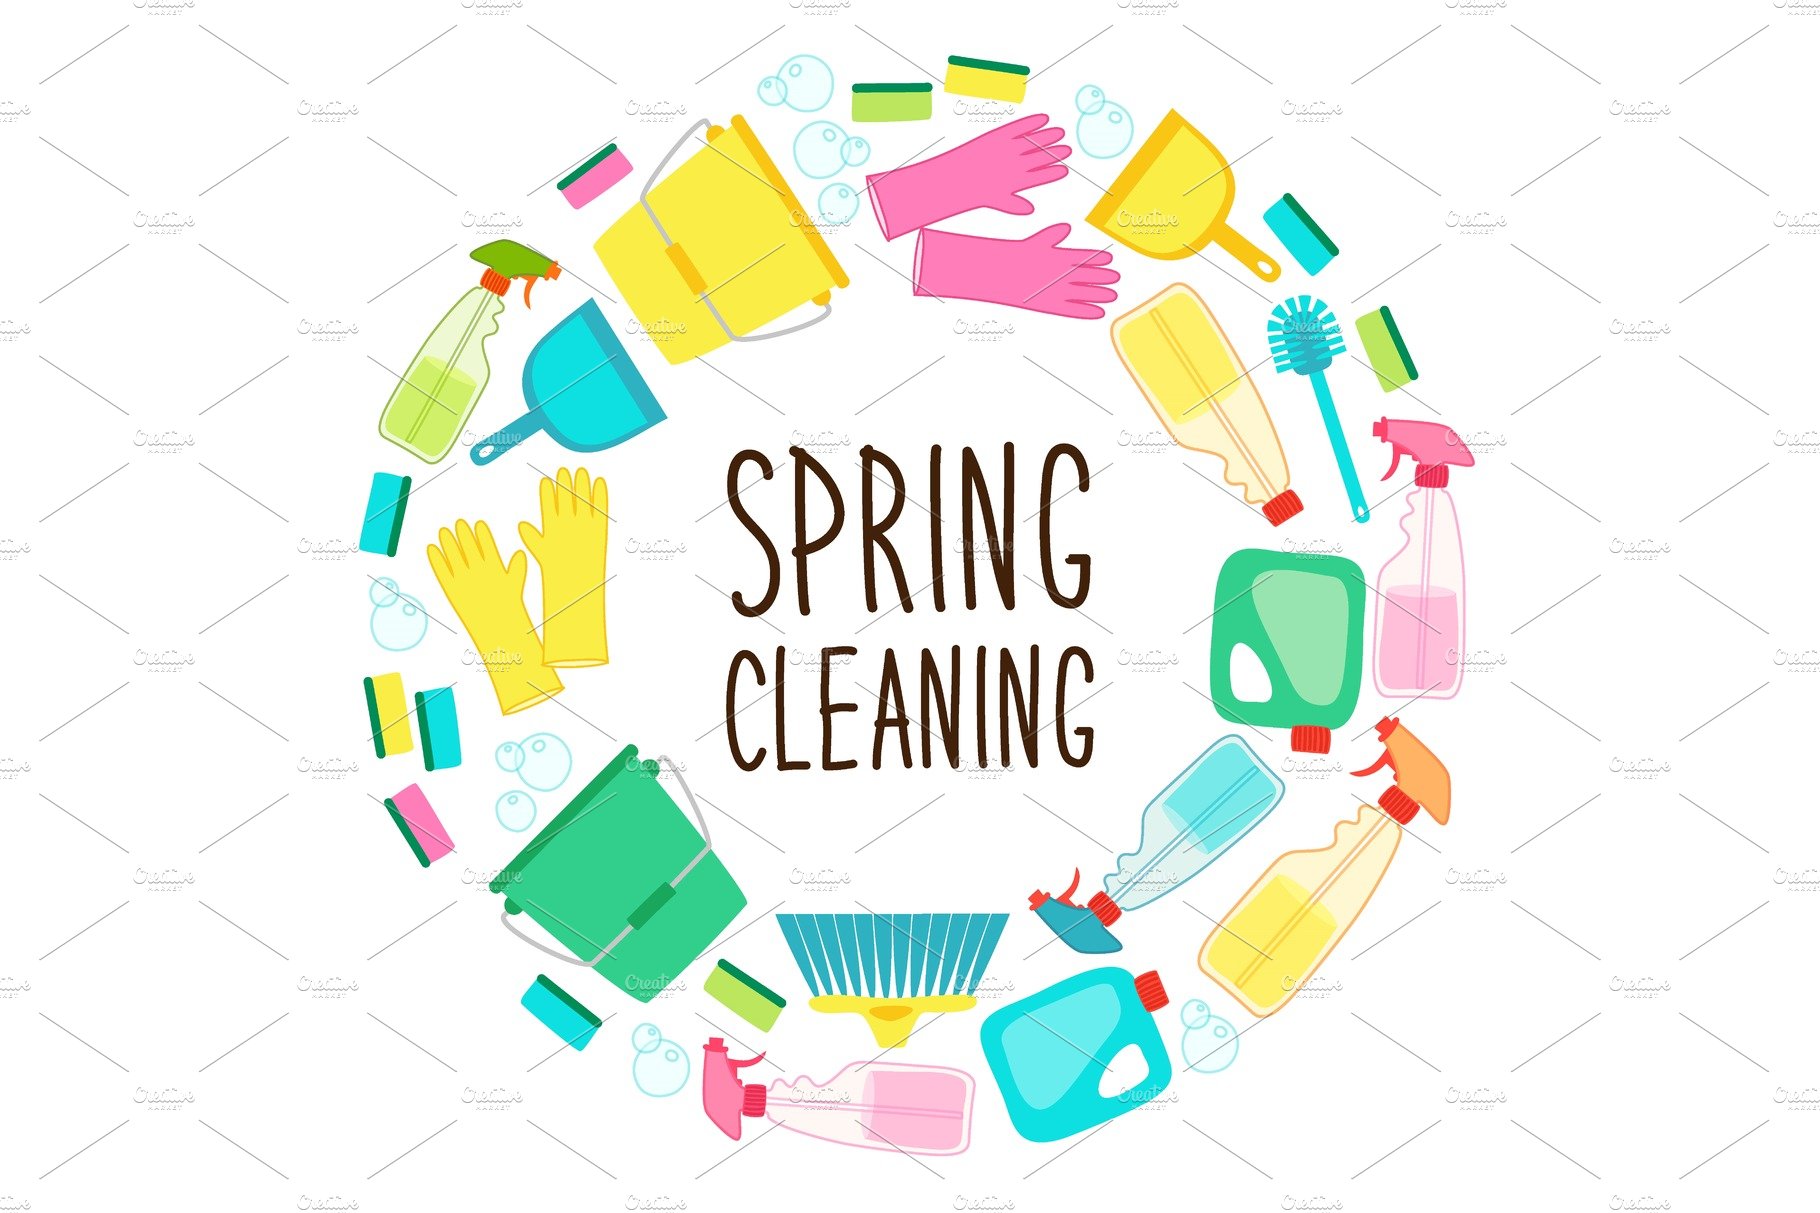 Cute spring cleaning utensils cover image.